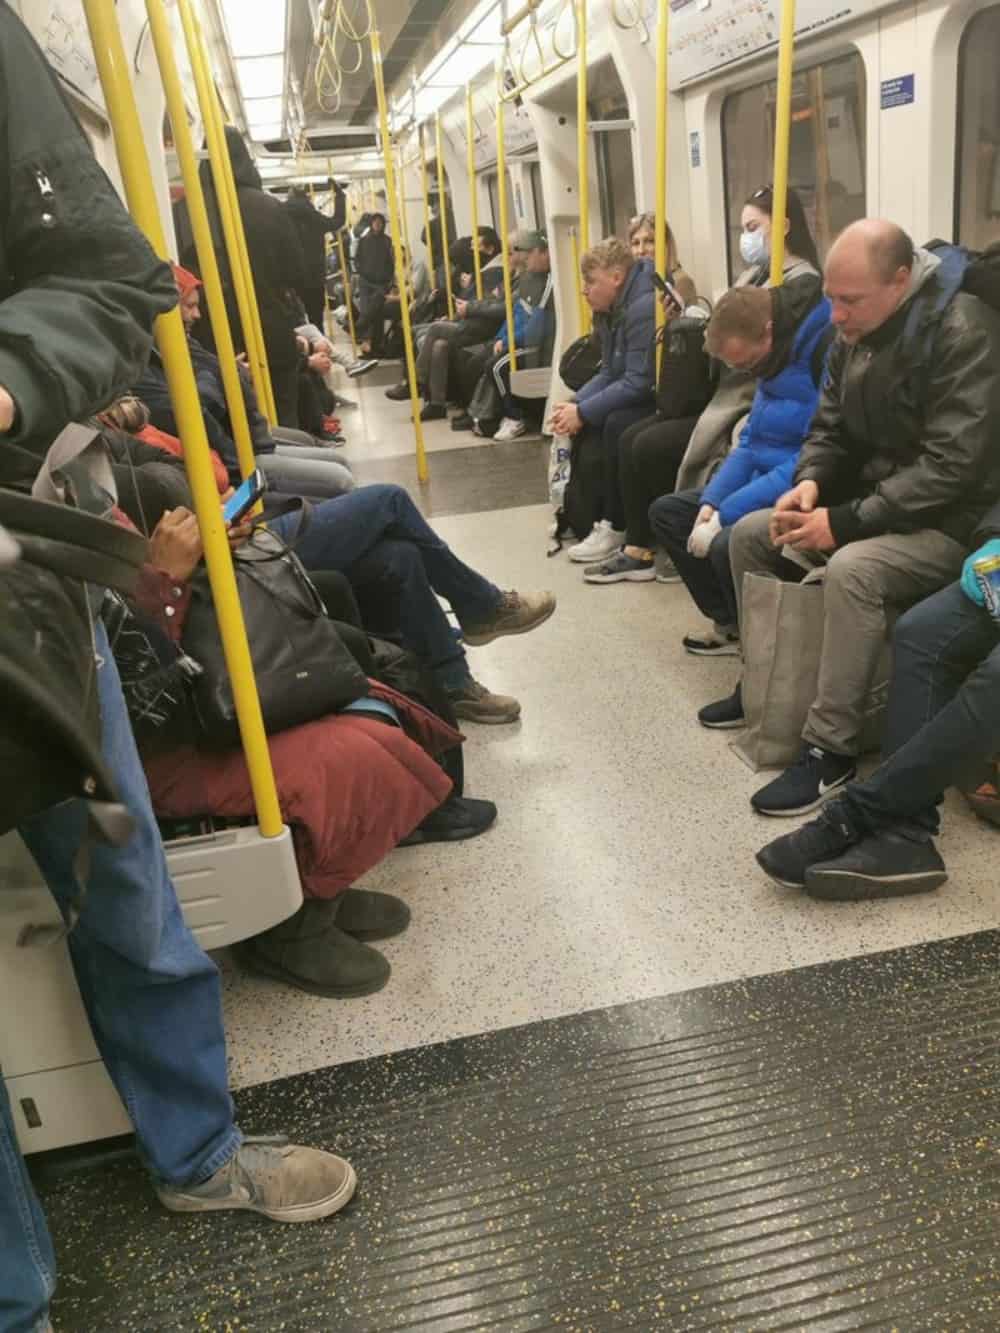 Tube trains crowded despite Johnson appeal as UK placed in lockdown